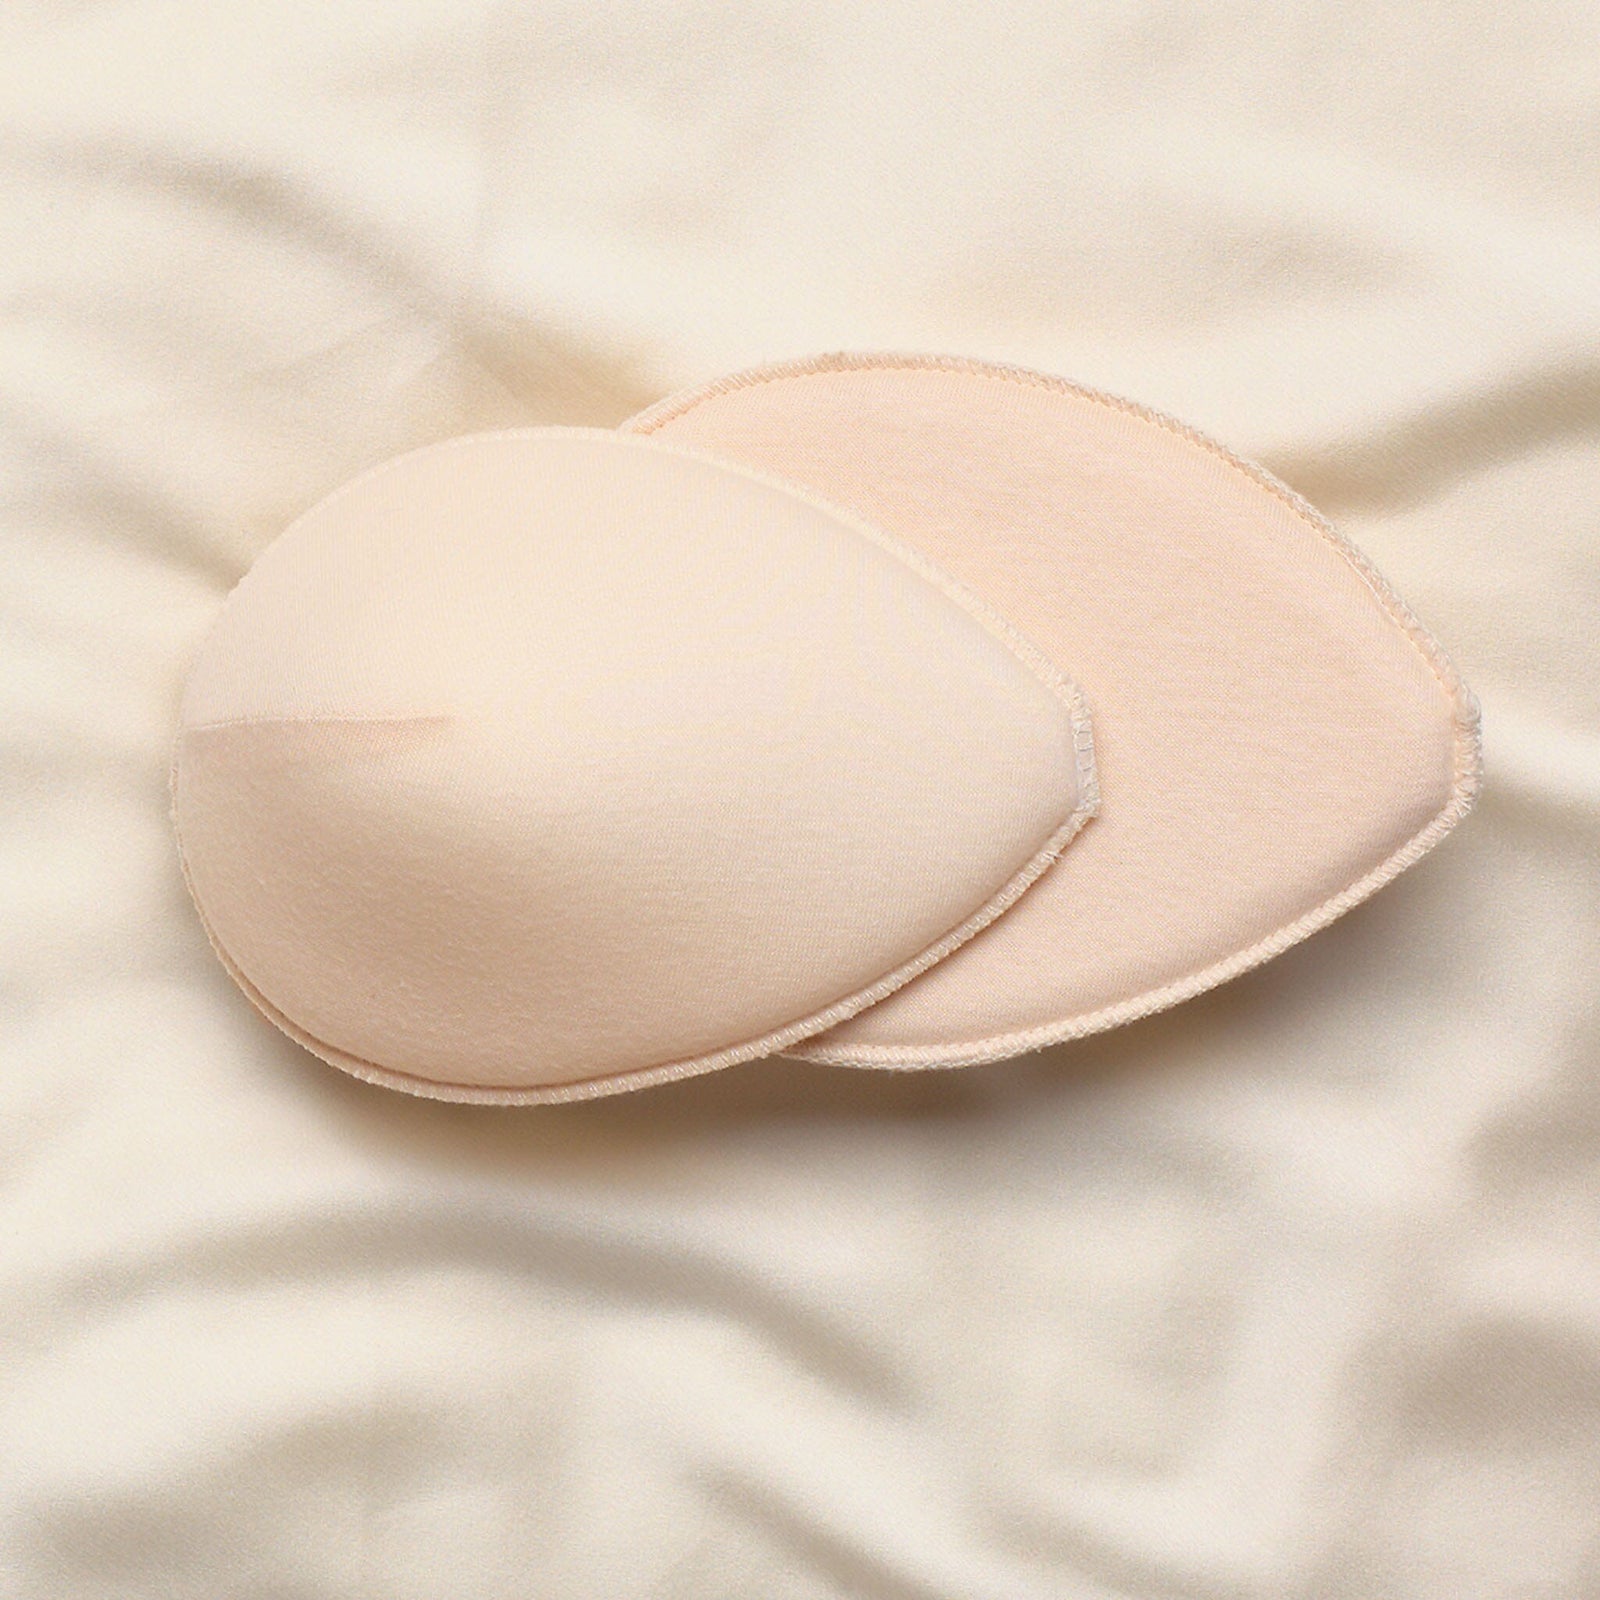 Non-Weighted Foam Breast Prosthesis -Triangle Bra Insert by Nearly Me